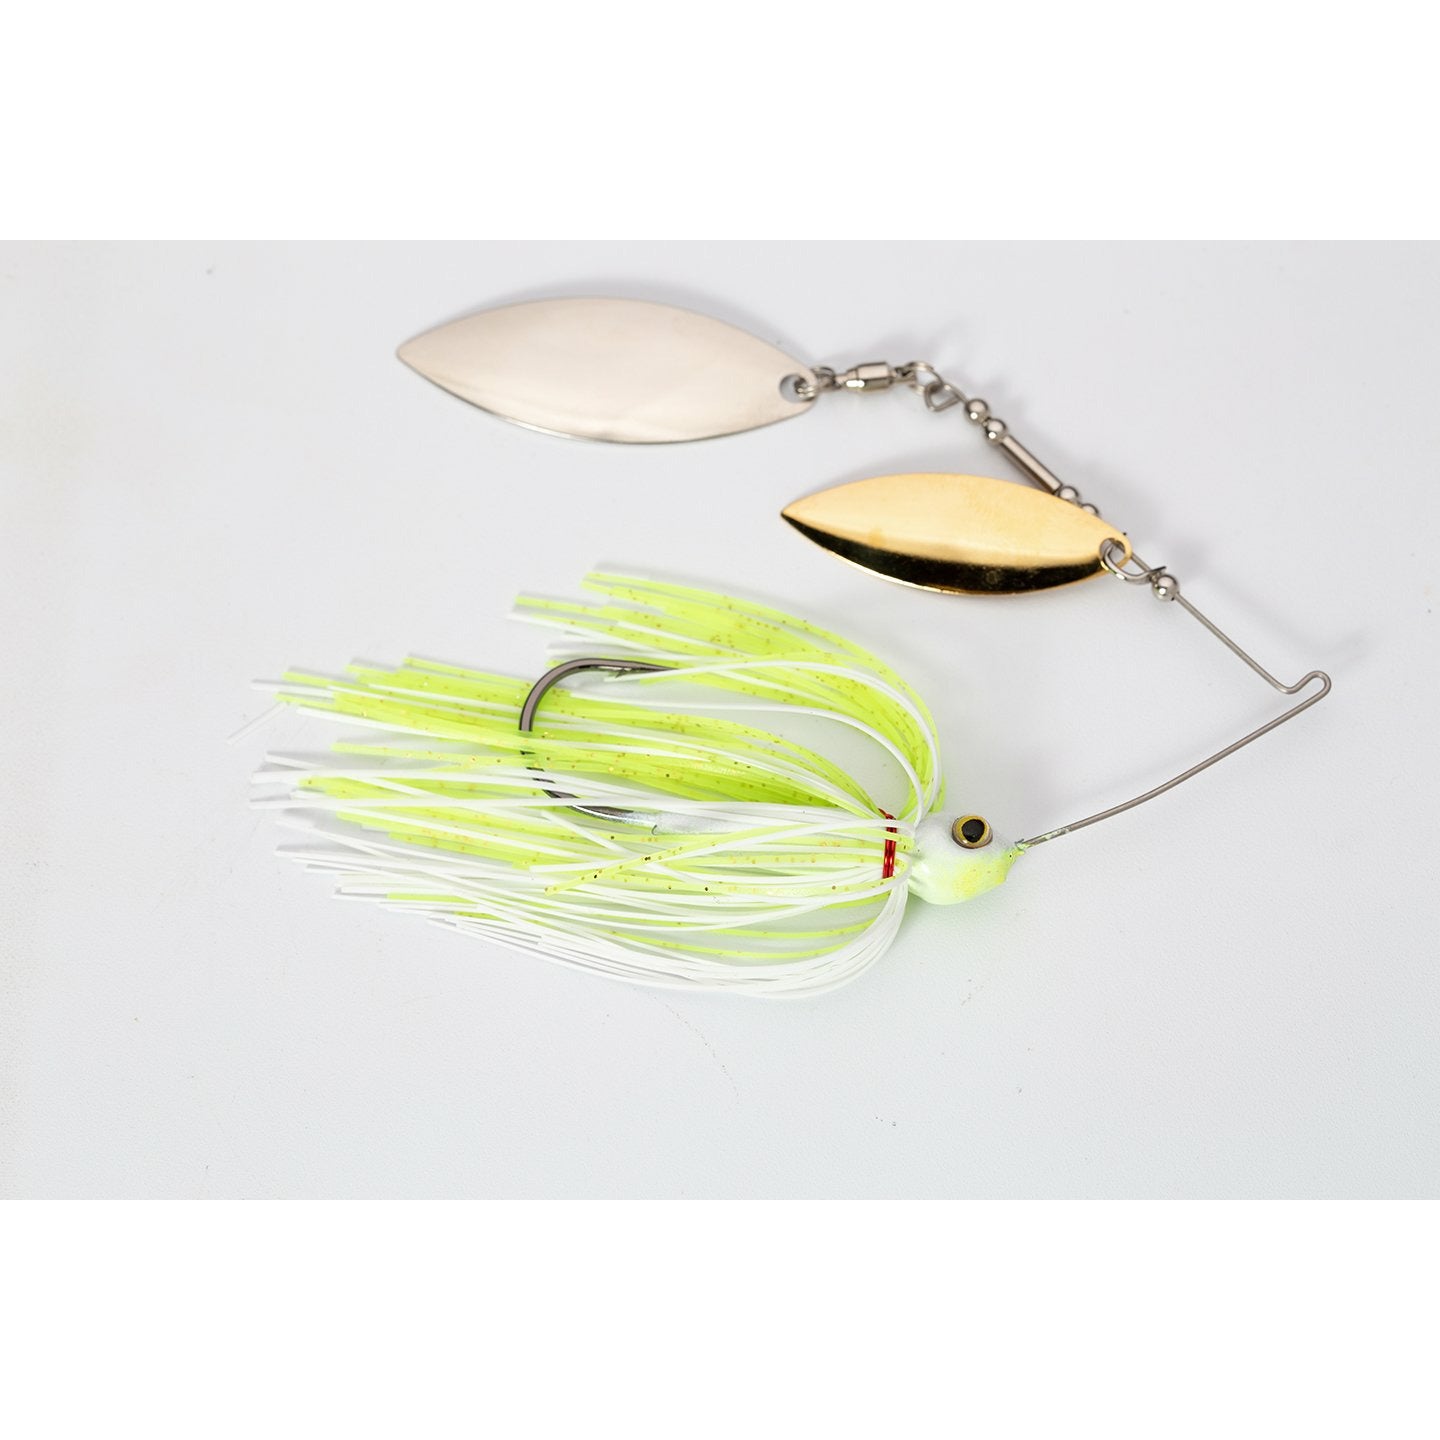 True South Guppy Rocket Double Willow Spinnerbaits 3/8 oz / Chartreuse White